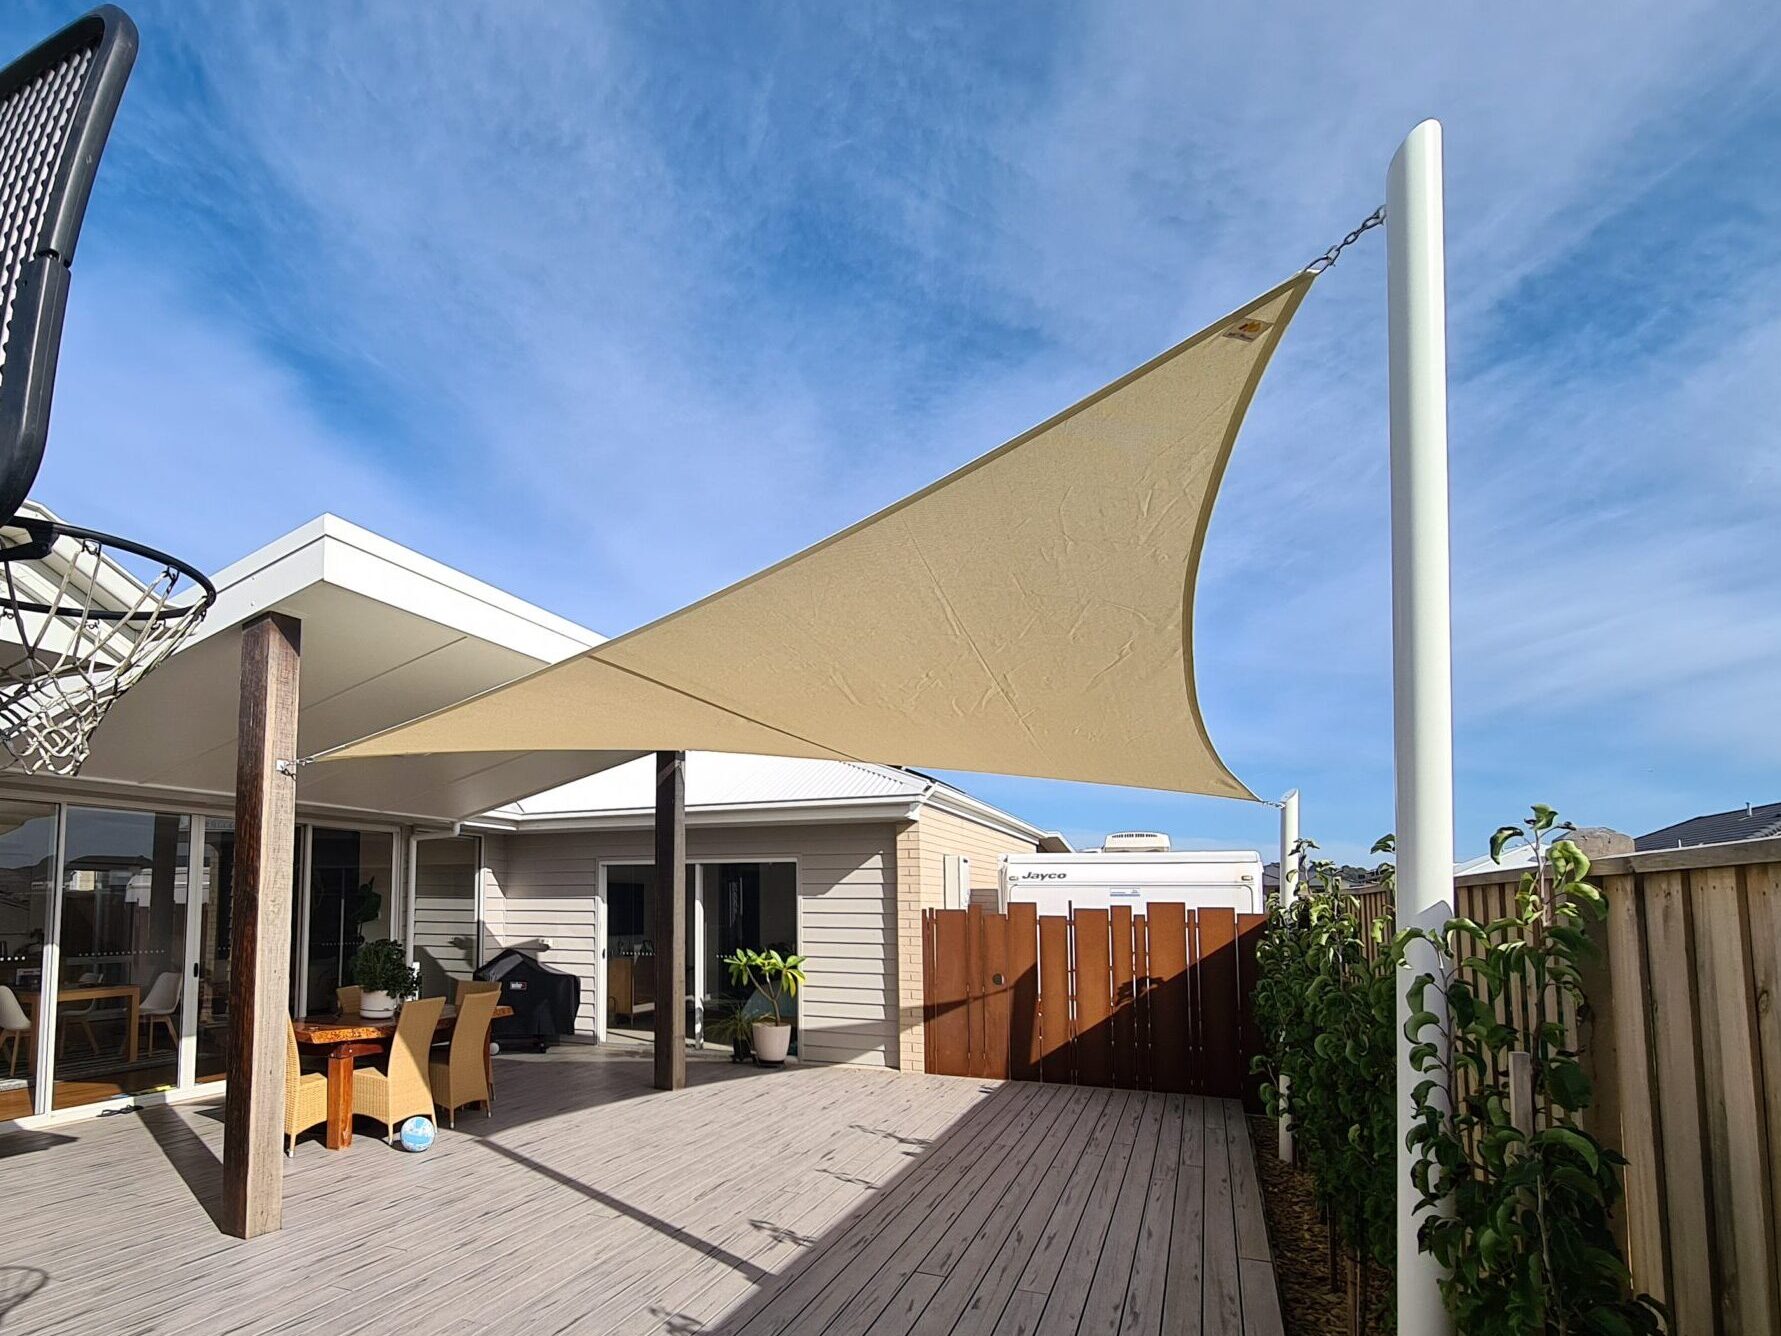 Shade Sails for Blocking heat from Windows